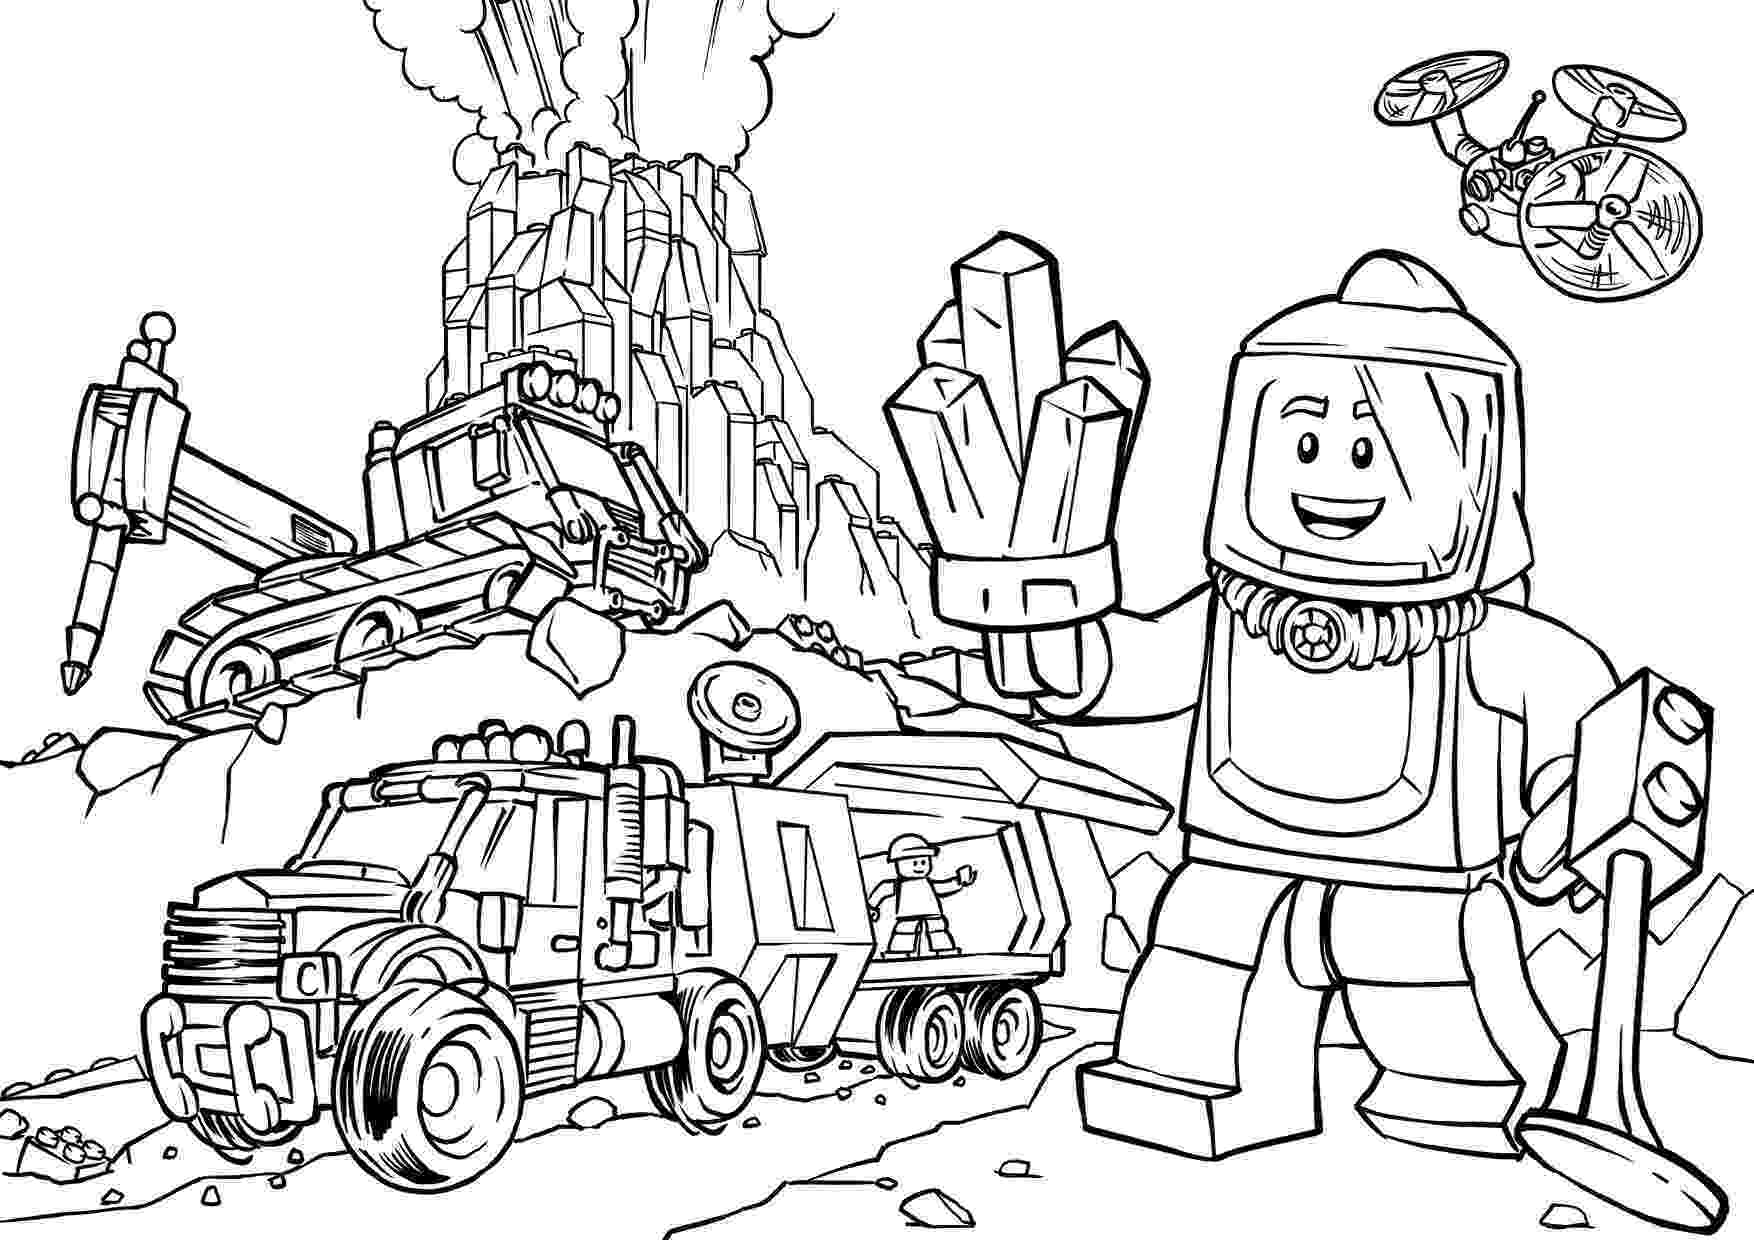 lego colouring sheet lego star wars coloring pages to download and print for free lego colouring sheet 